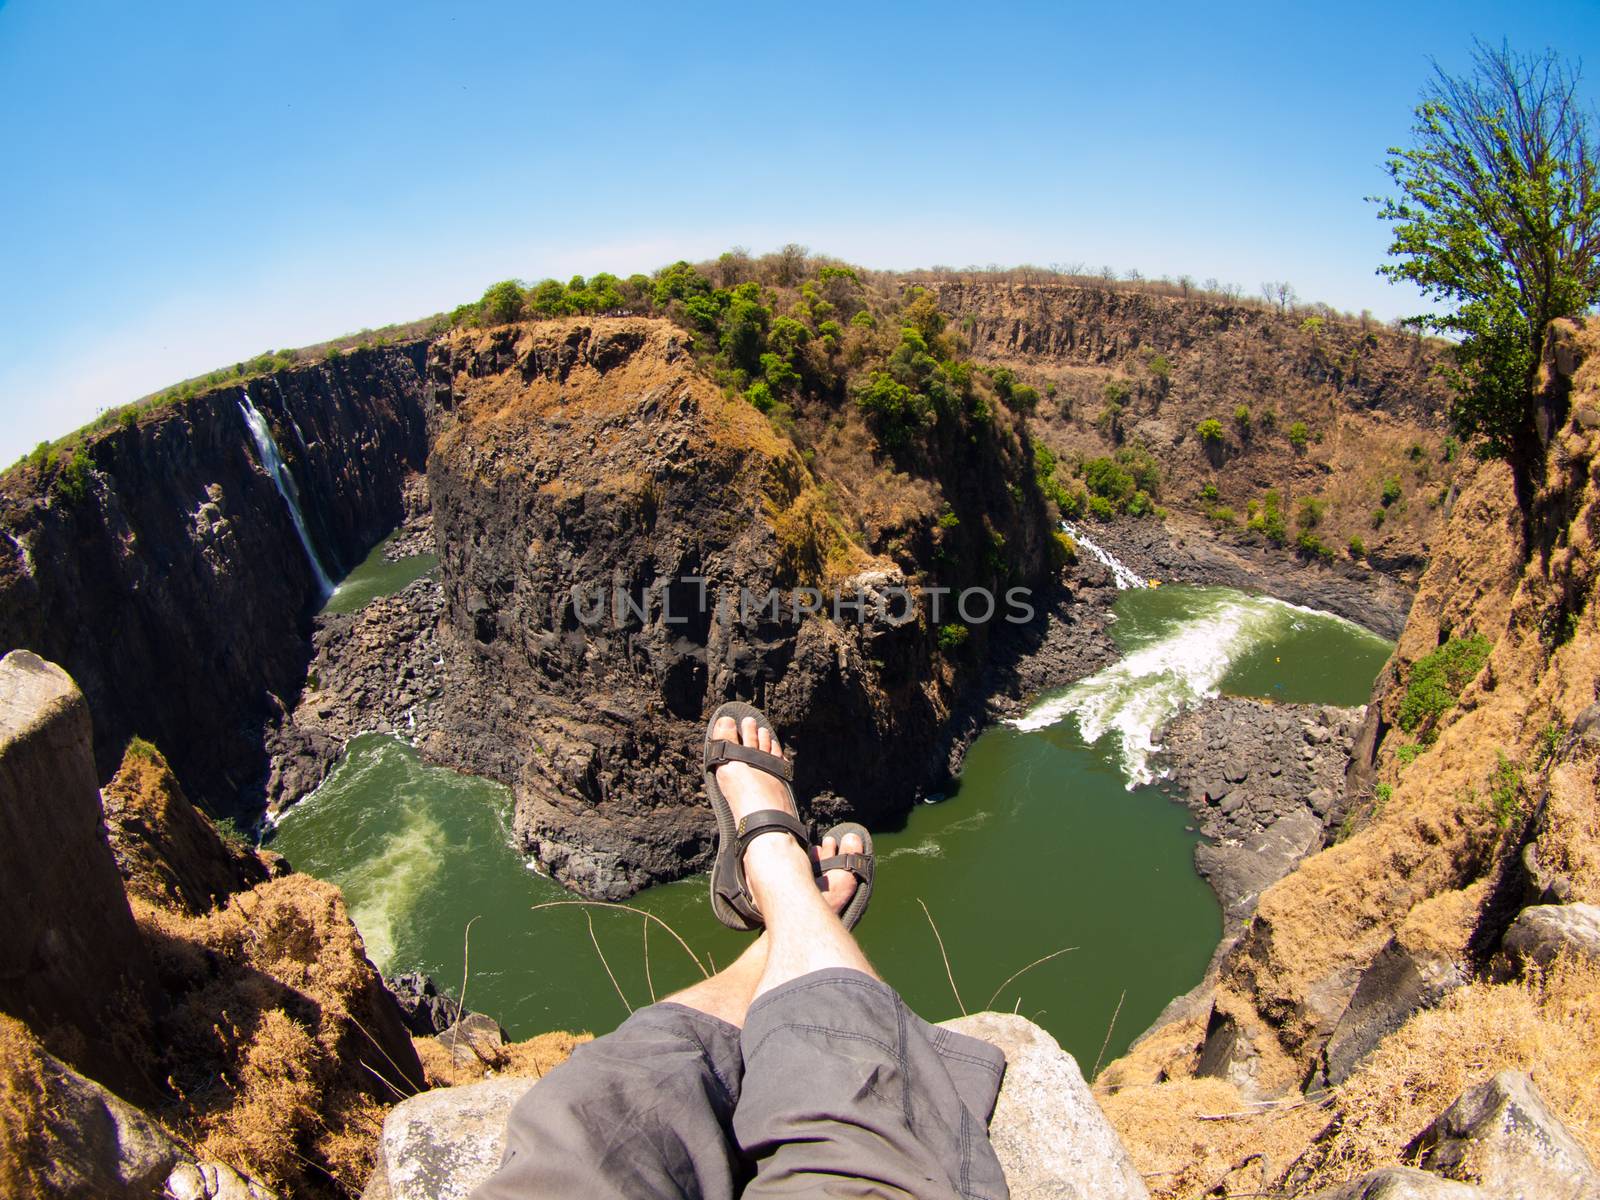 Having a rest at Victoria falls in dry season by pyty